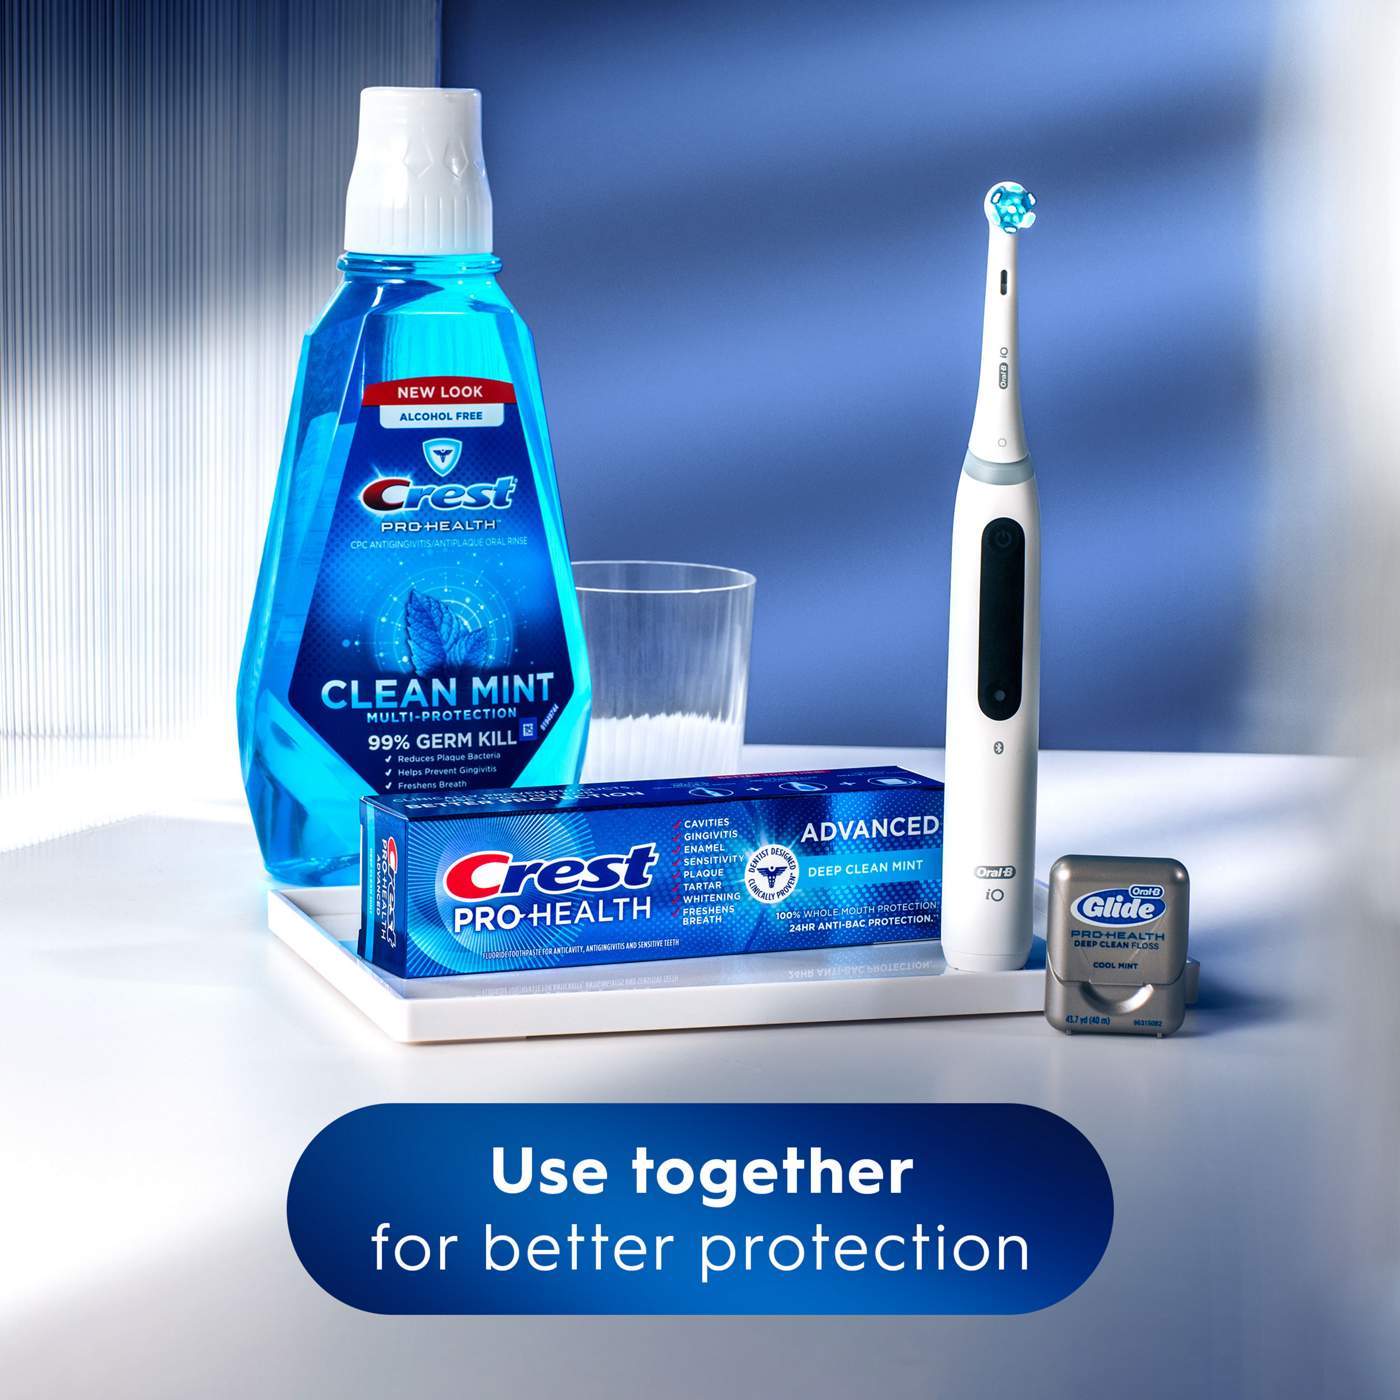 Crest Pro-Health Advanced Tooth Paste - Deep Clean Mint; image 7 of 9